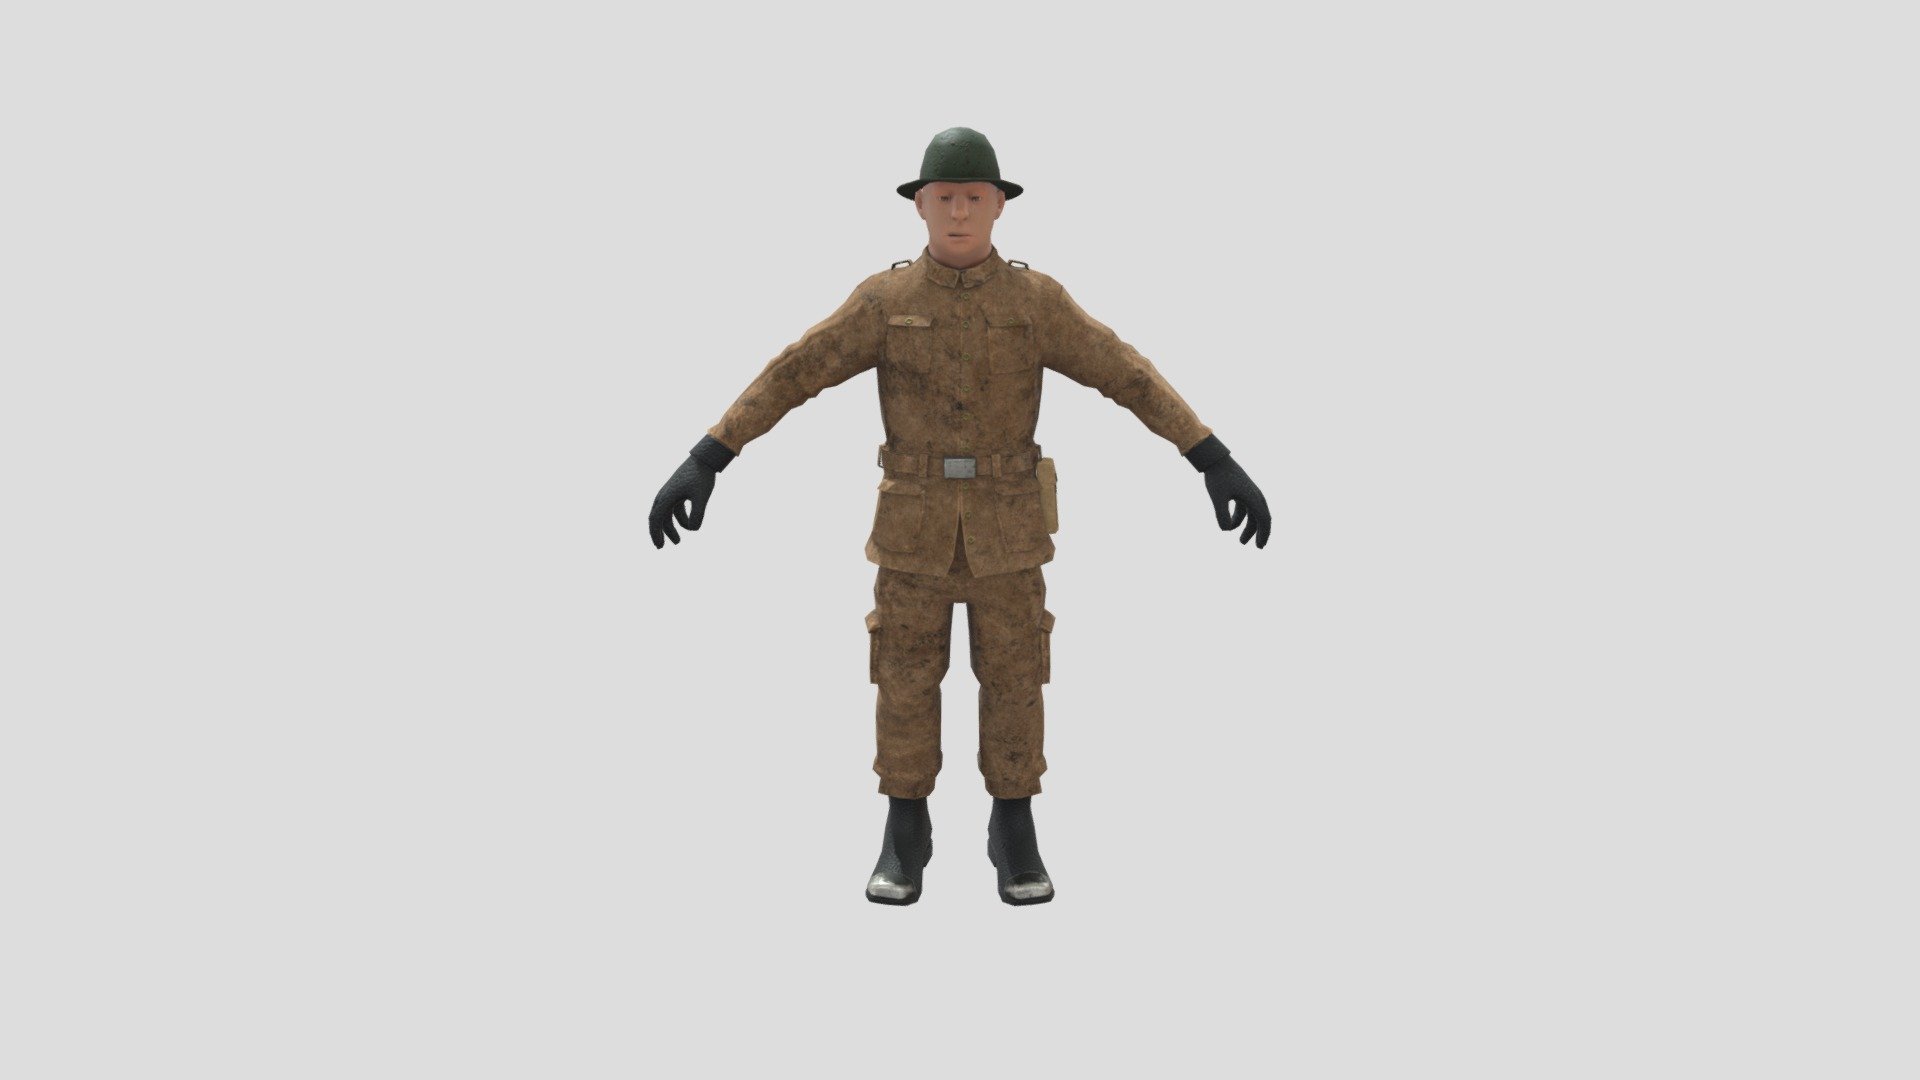 Was trying to make a ww1 style army guy, didn't get around to finishing but this is where I'm up to 3d model